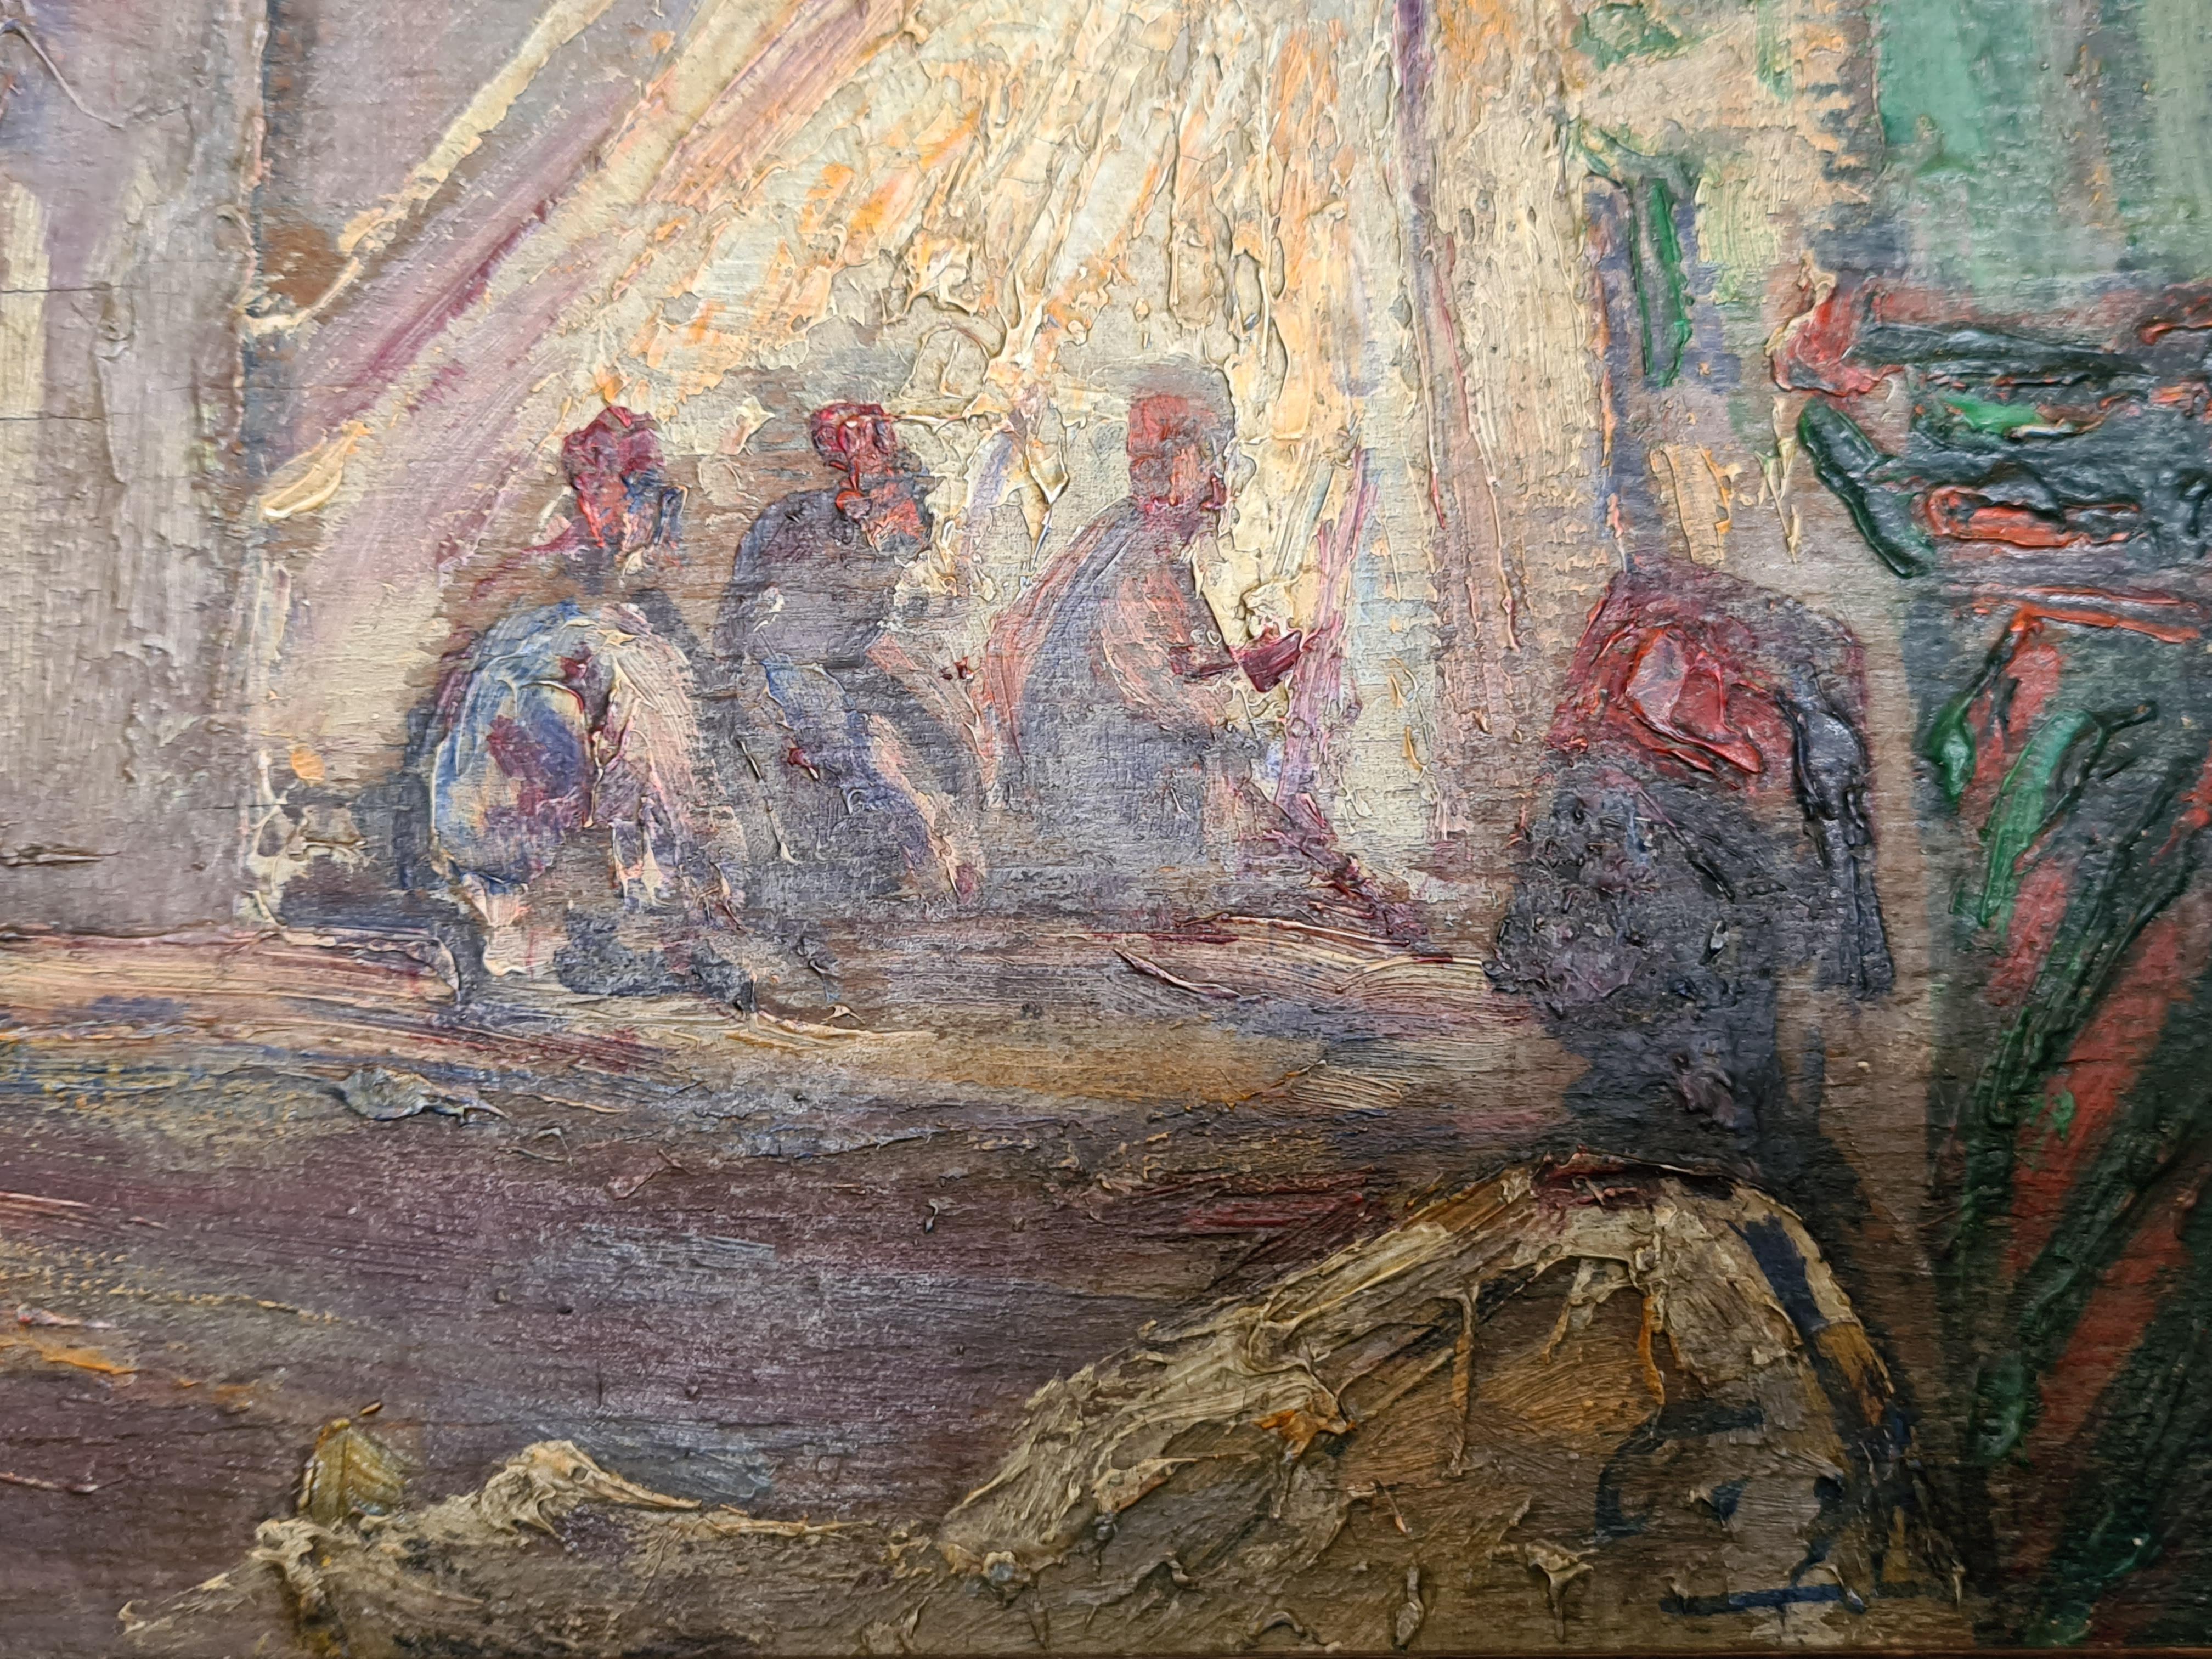 Orientalist View of Vendors in a Market, signed CA 2